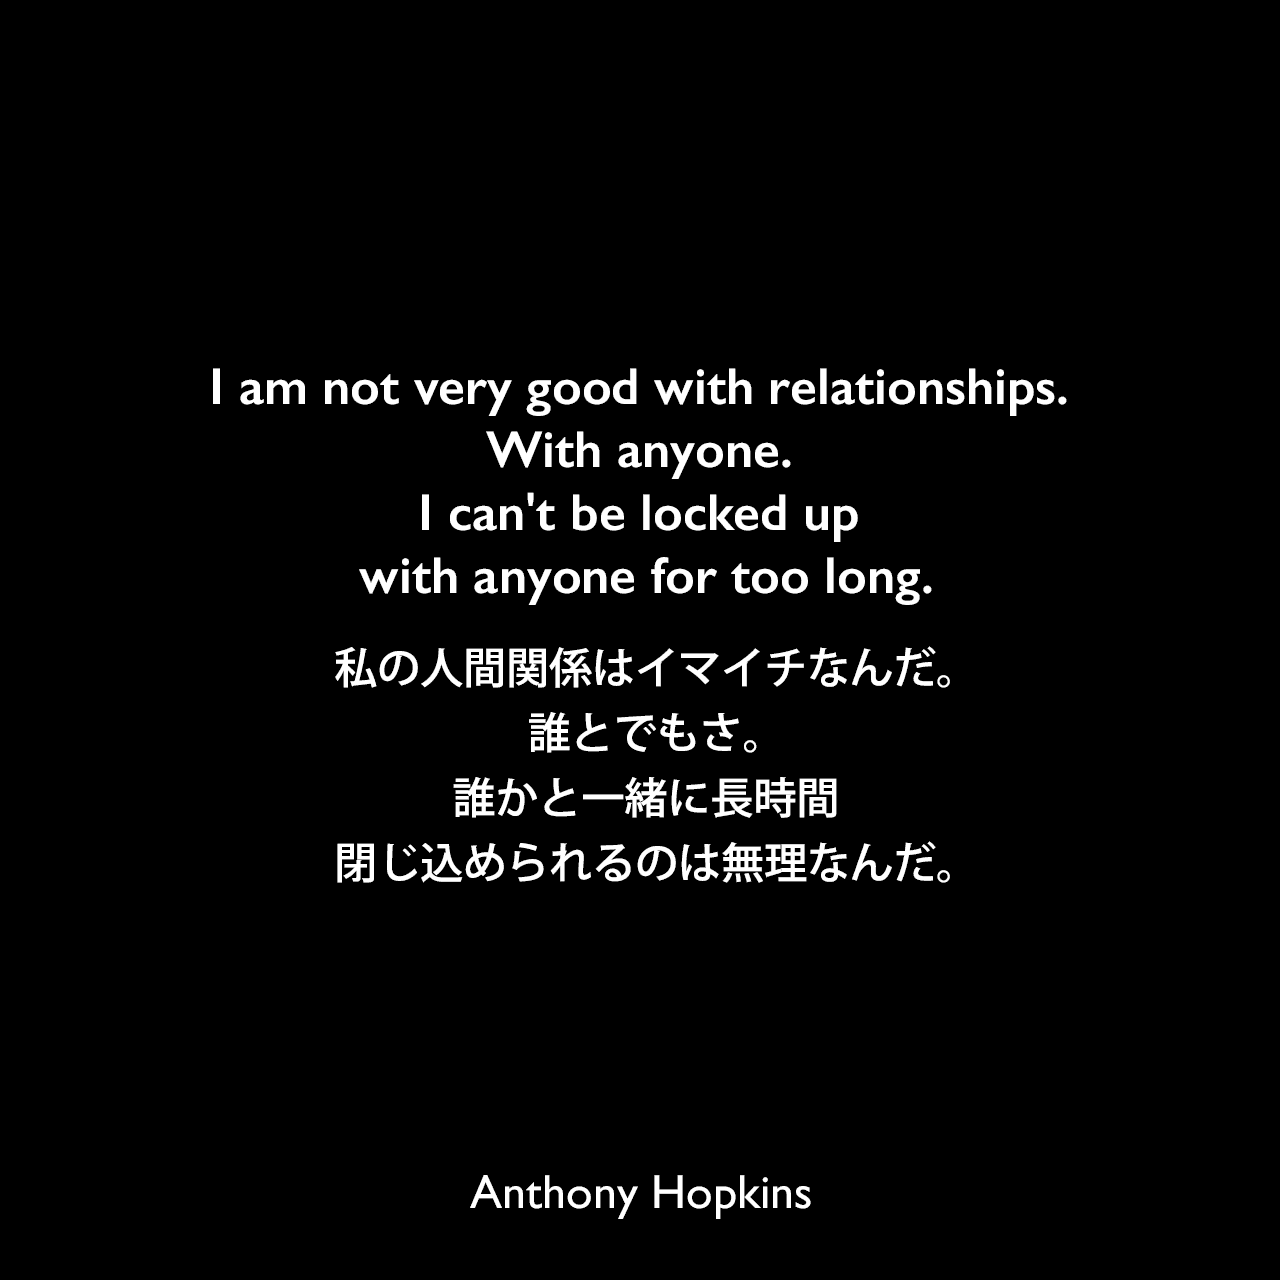 I am not very good with relationships. With anyone. I can't be locked up with anyone for too long.私の人間関係はイマイチなんだ。誰とでもさ。誰かと一緒に長時間閉じ込められるのは無理なんだ。Anthony Hopkins